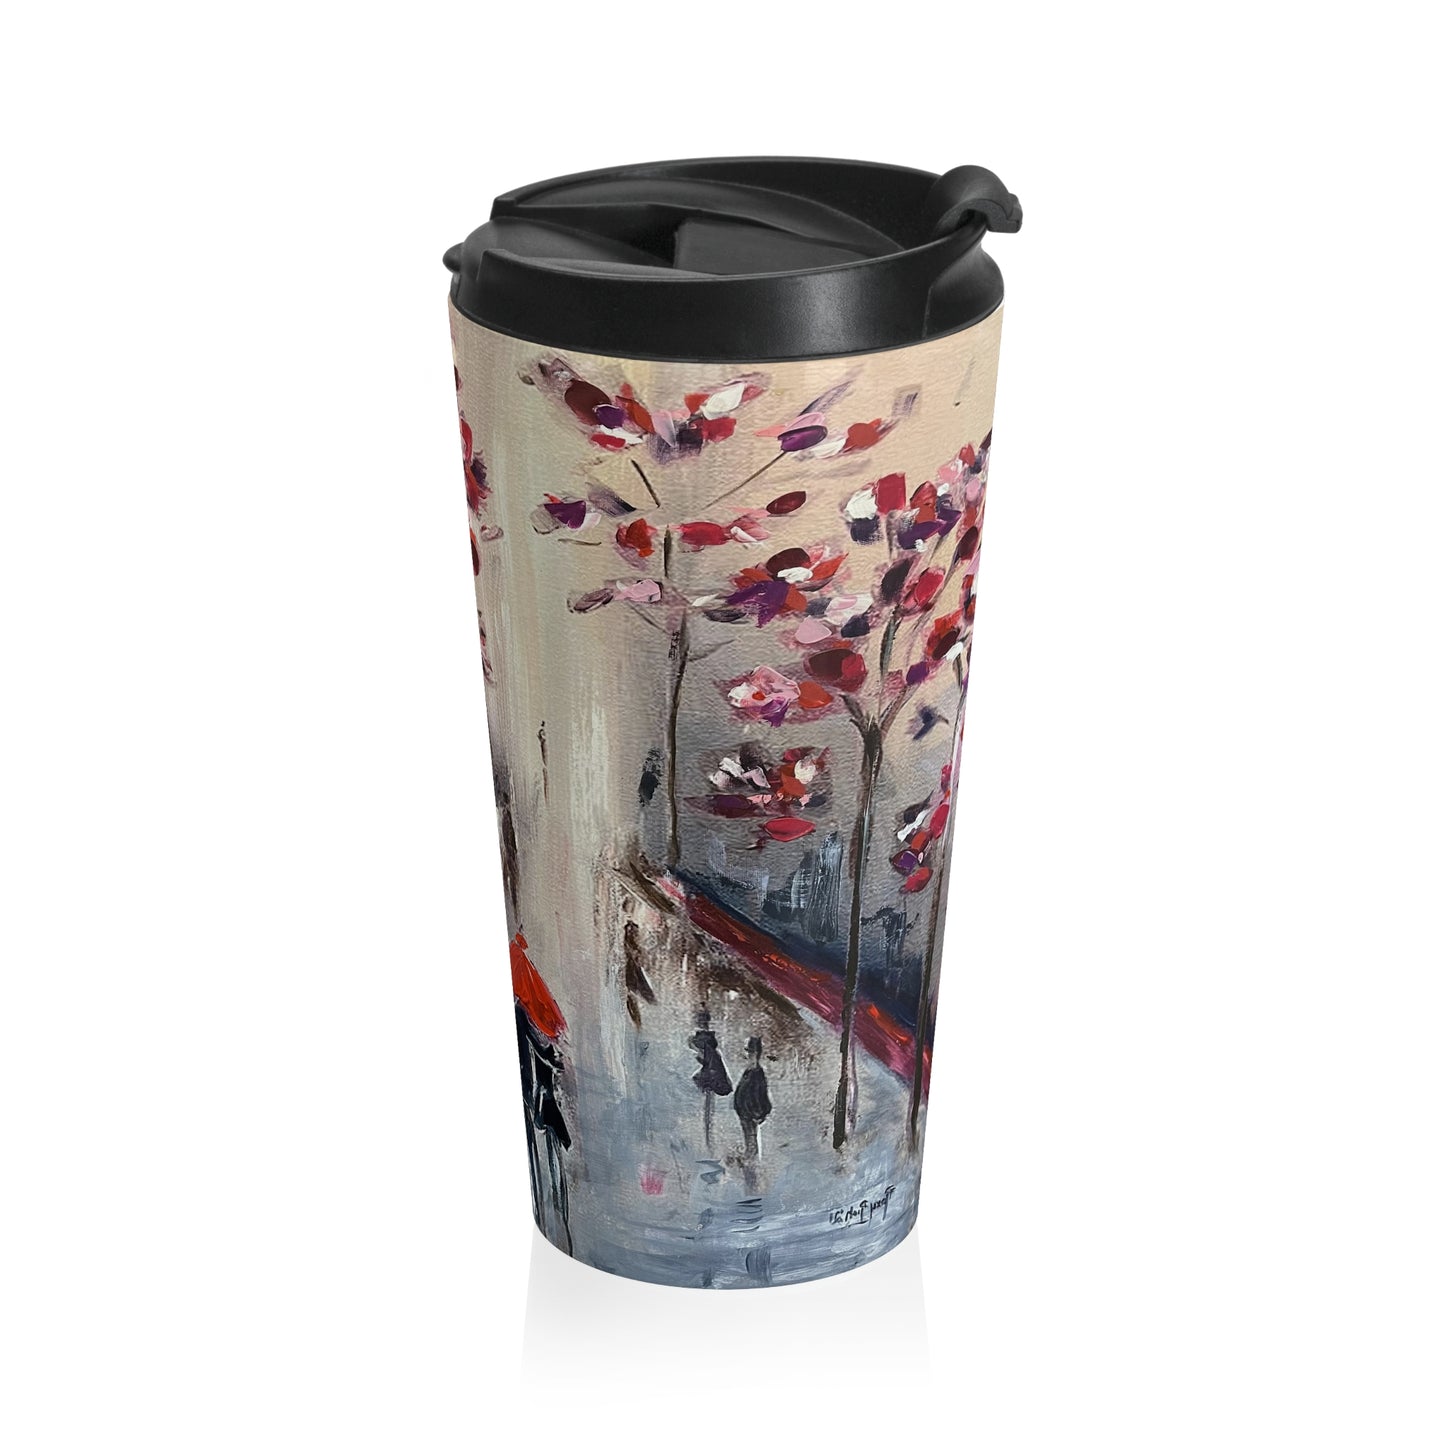 "That's How We Stroll" Strolling in Paris Romantic Stainless Steel Travel Mug